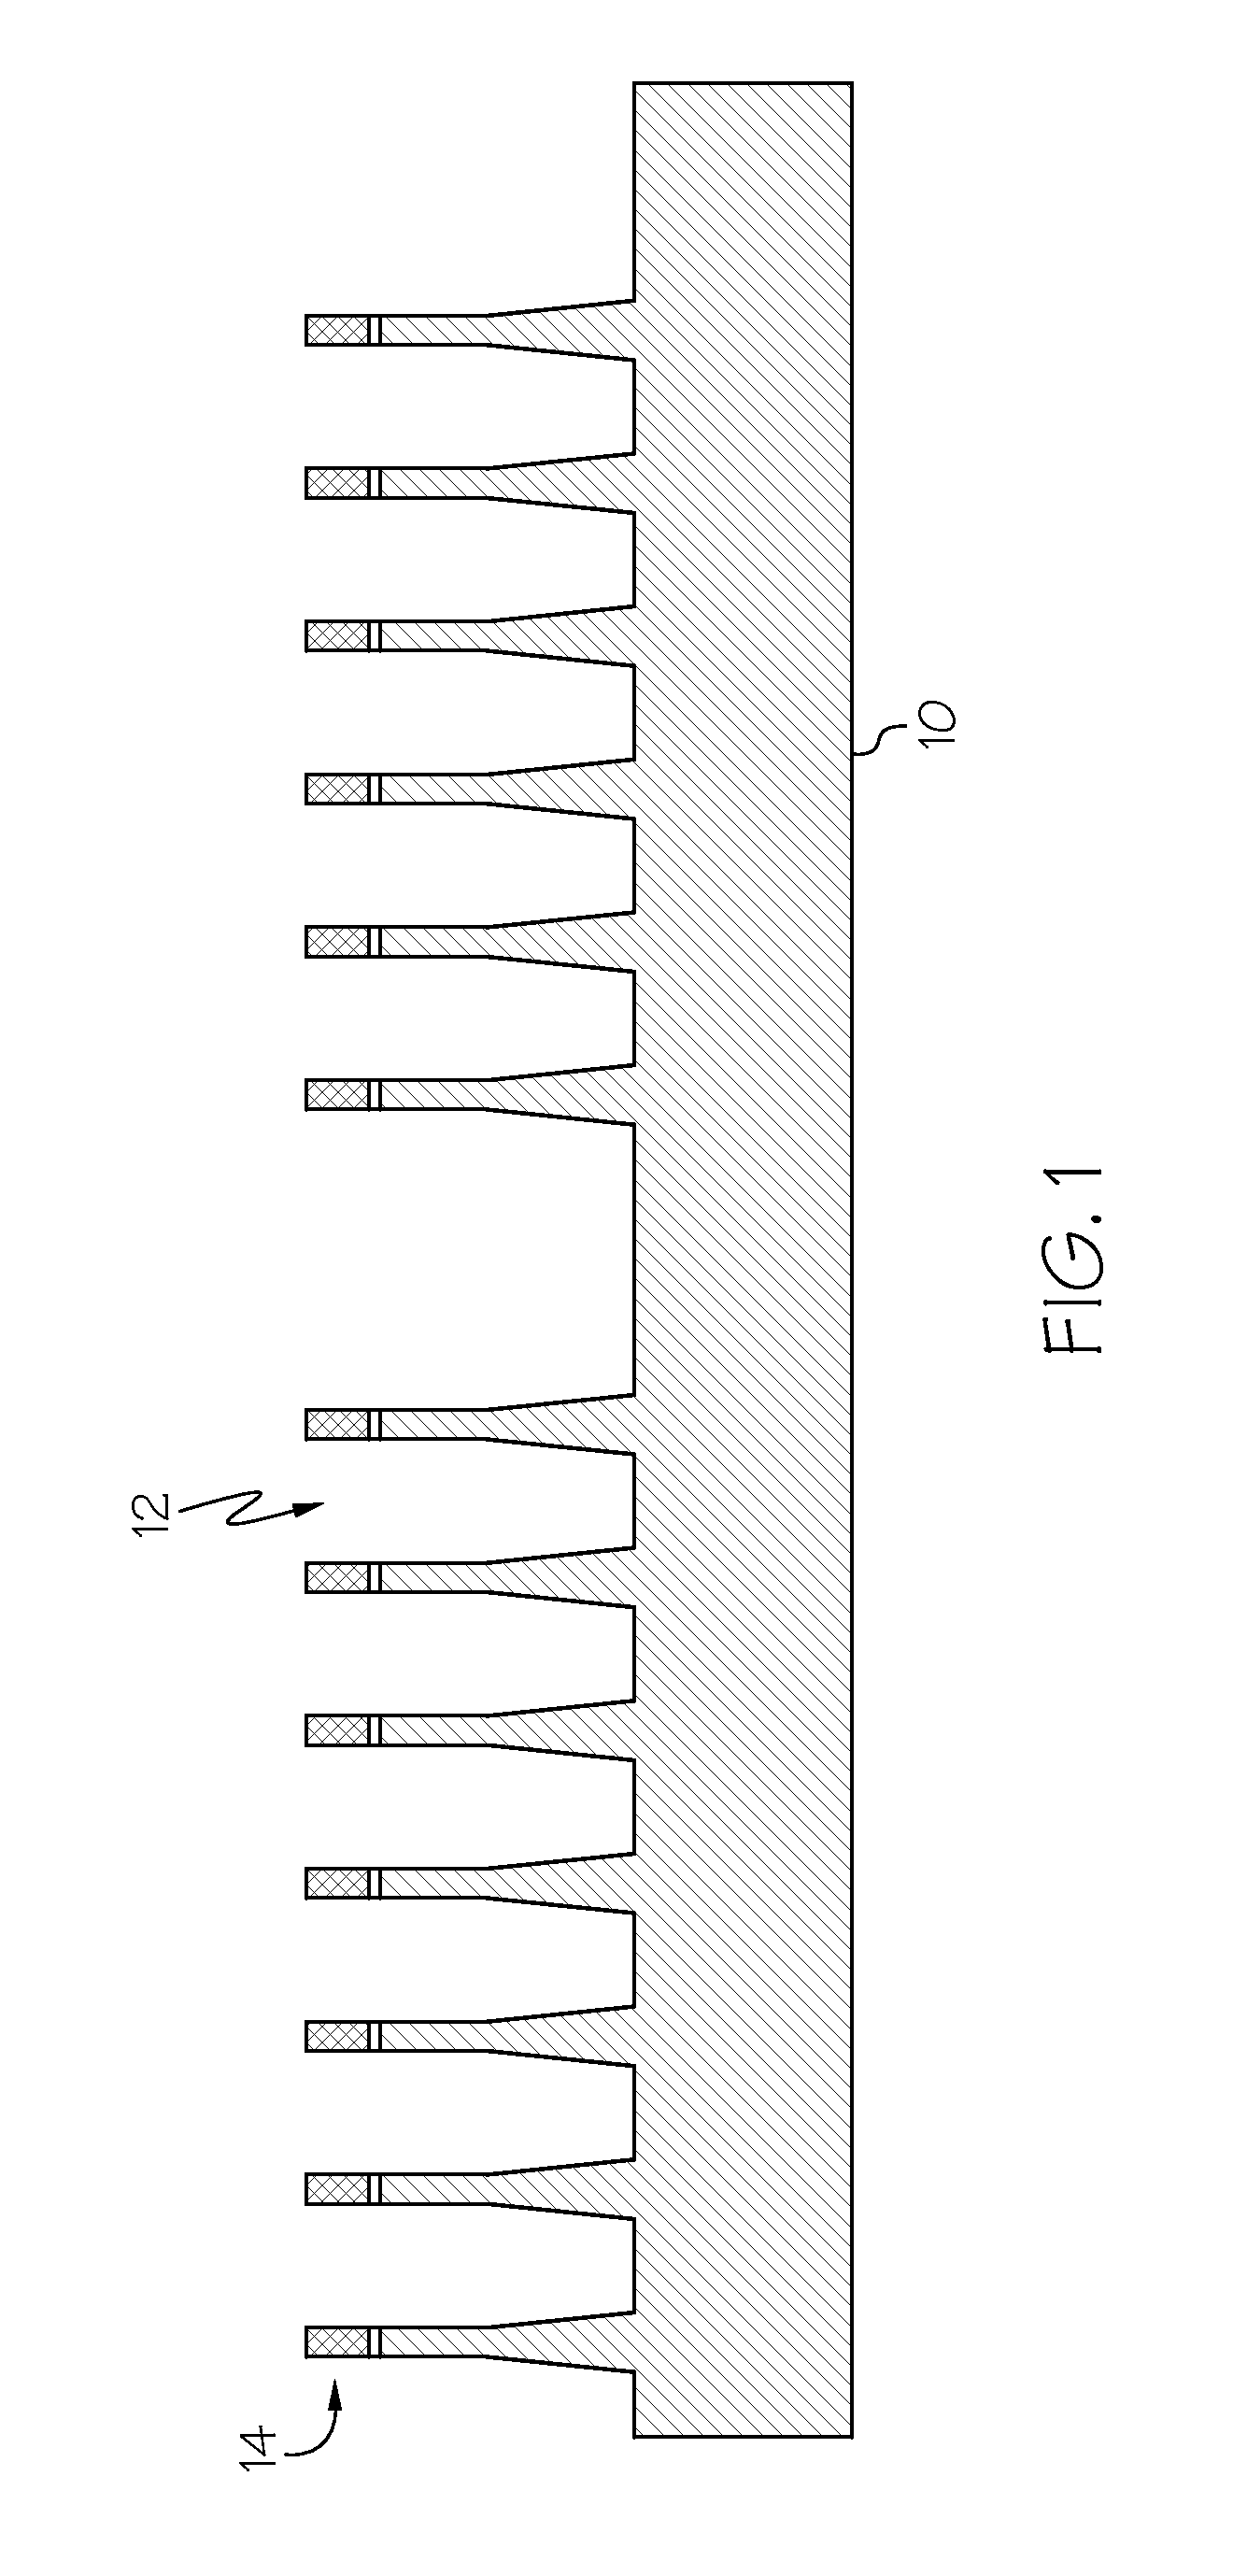 Shallow trench isolation integration methods and devices formed thereby